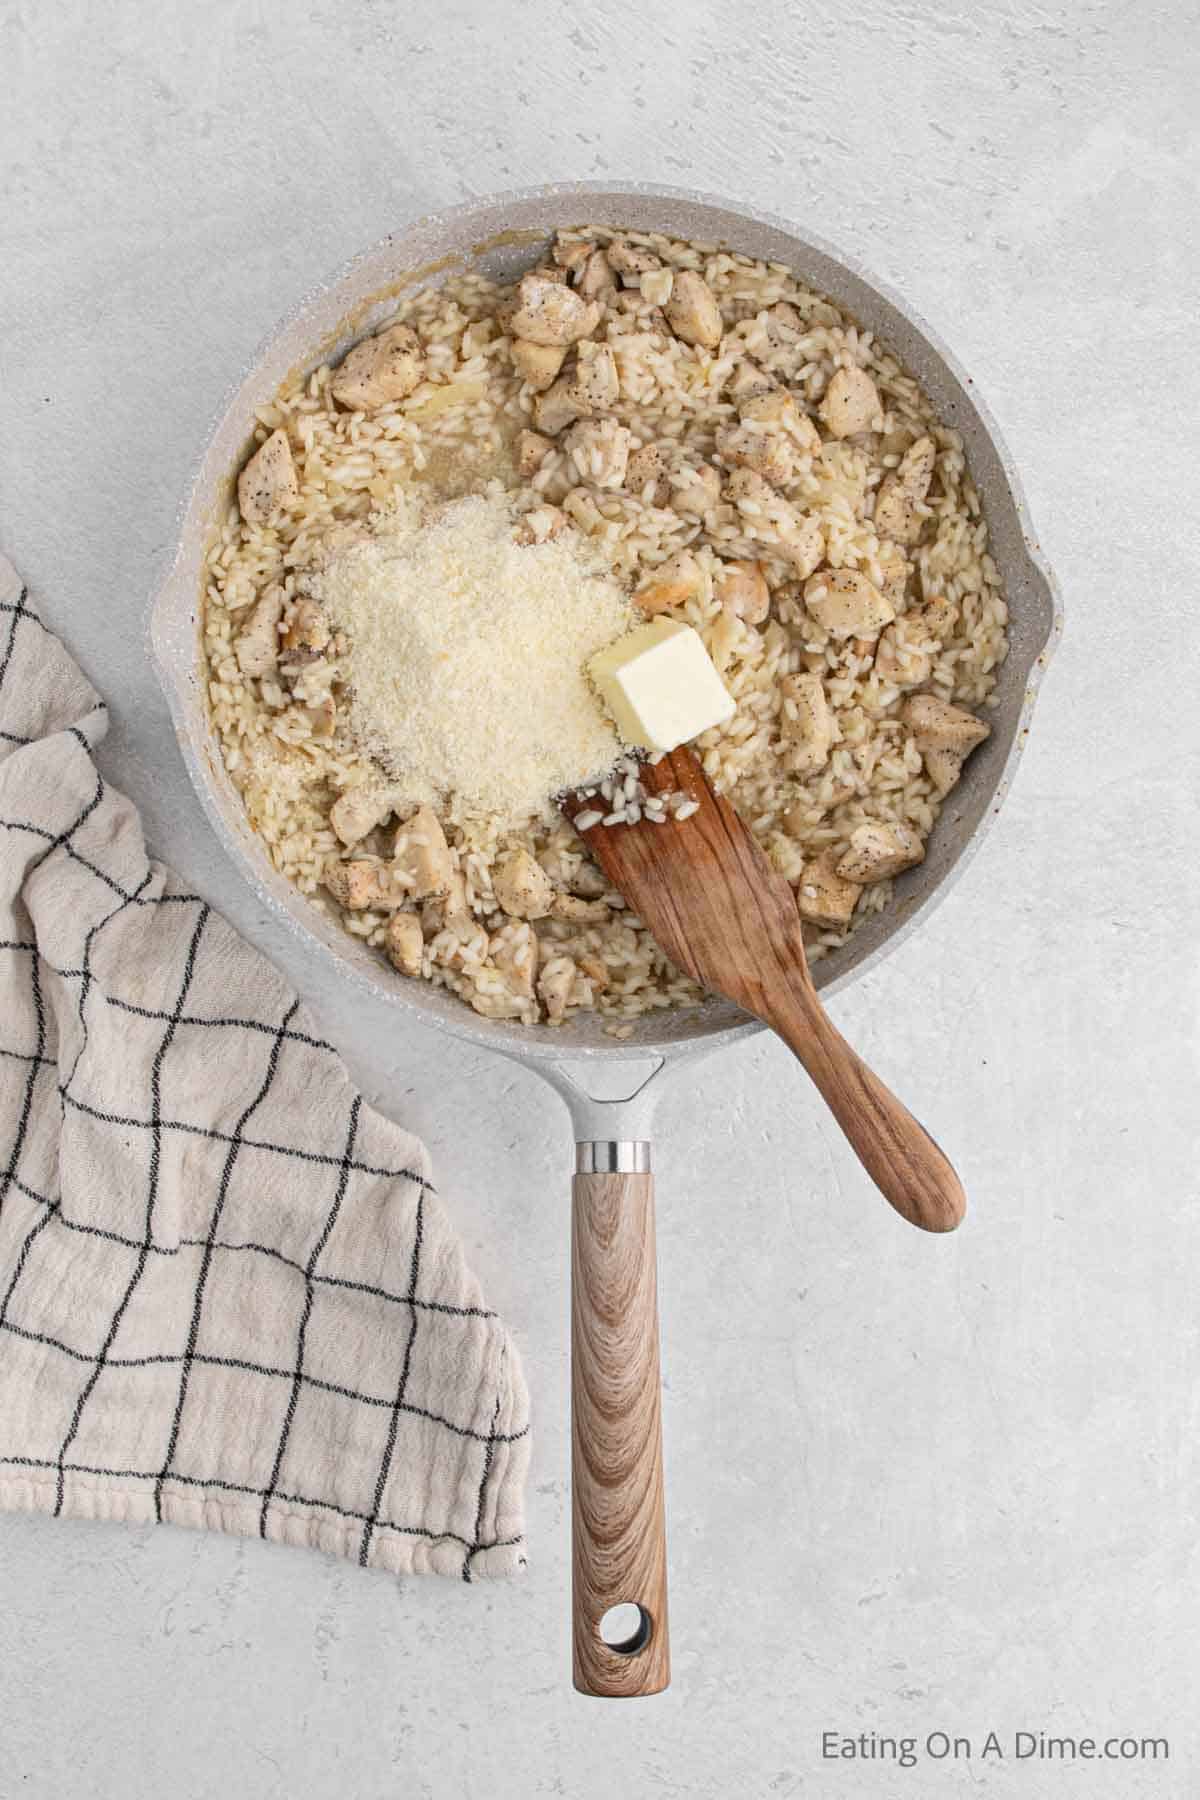 Adding in parmesan and butter to the cooked risotto and chicken in a skillet